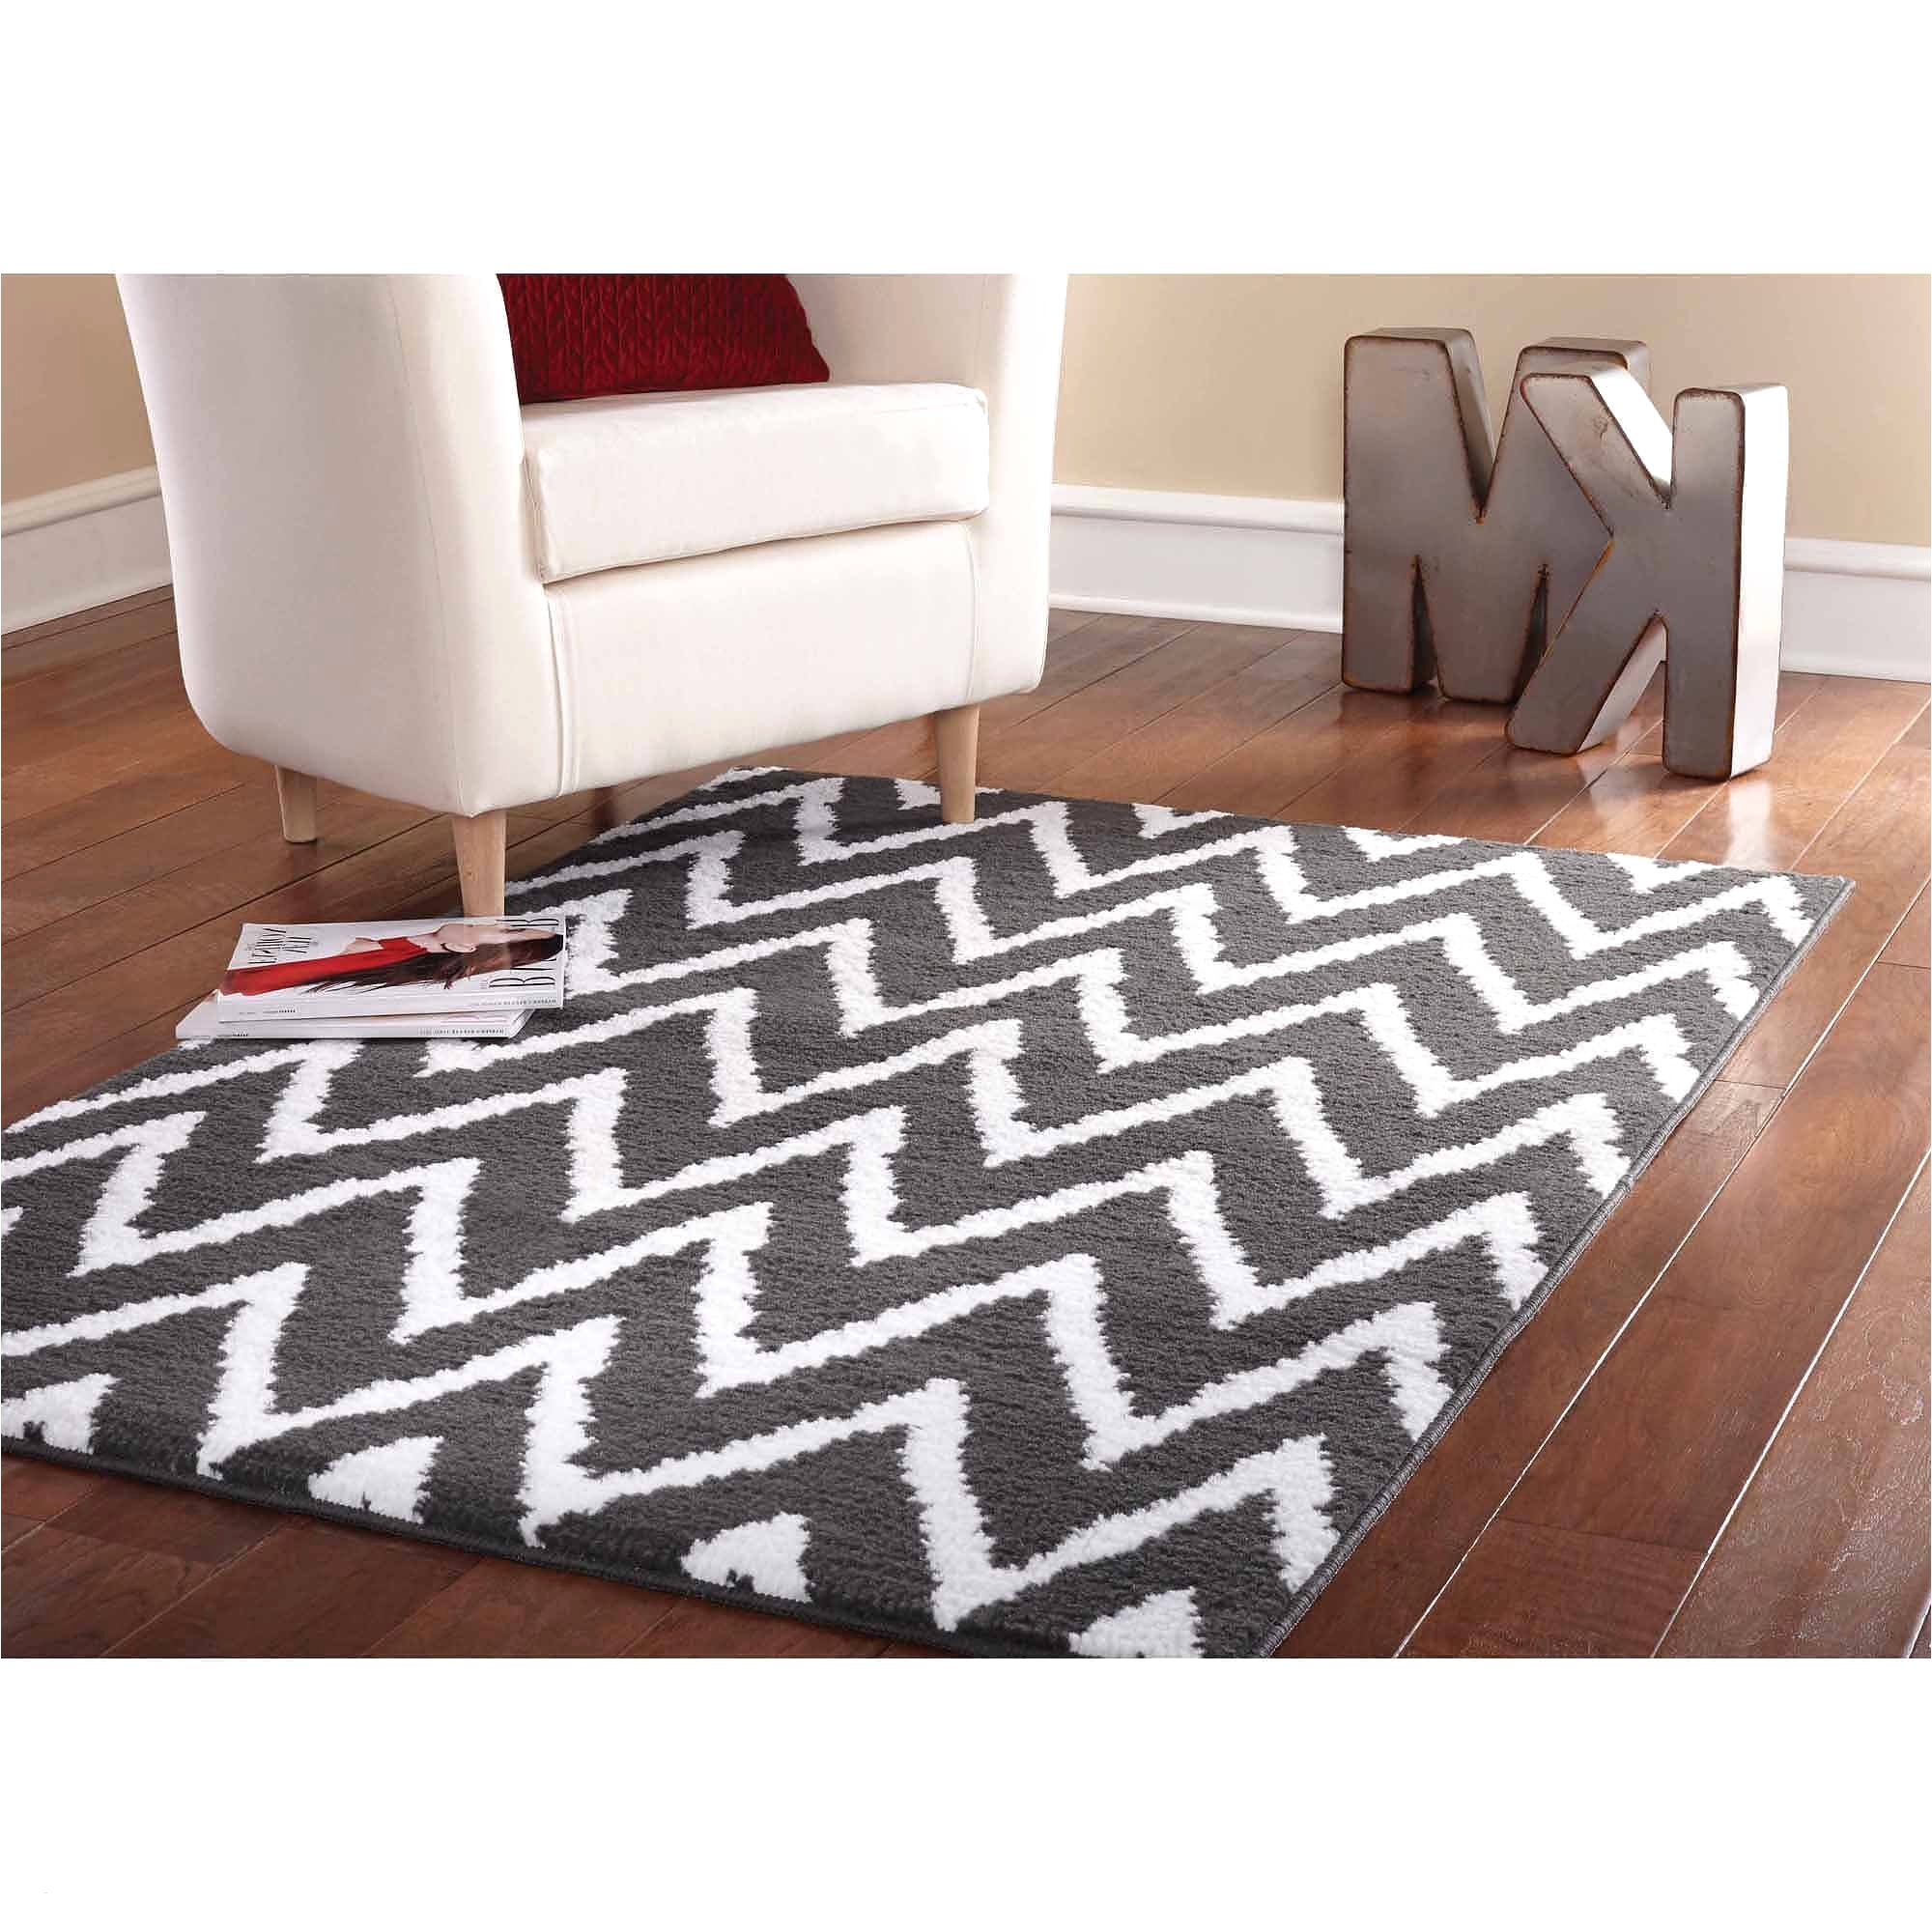 patio rugs lowes beautiful 41 awesome outdoor rugs lowes you don t realize outdoor design